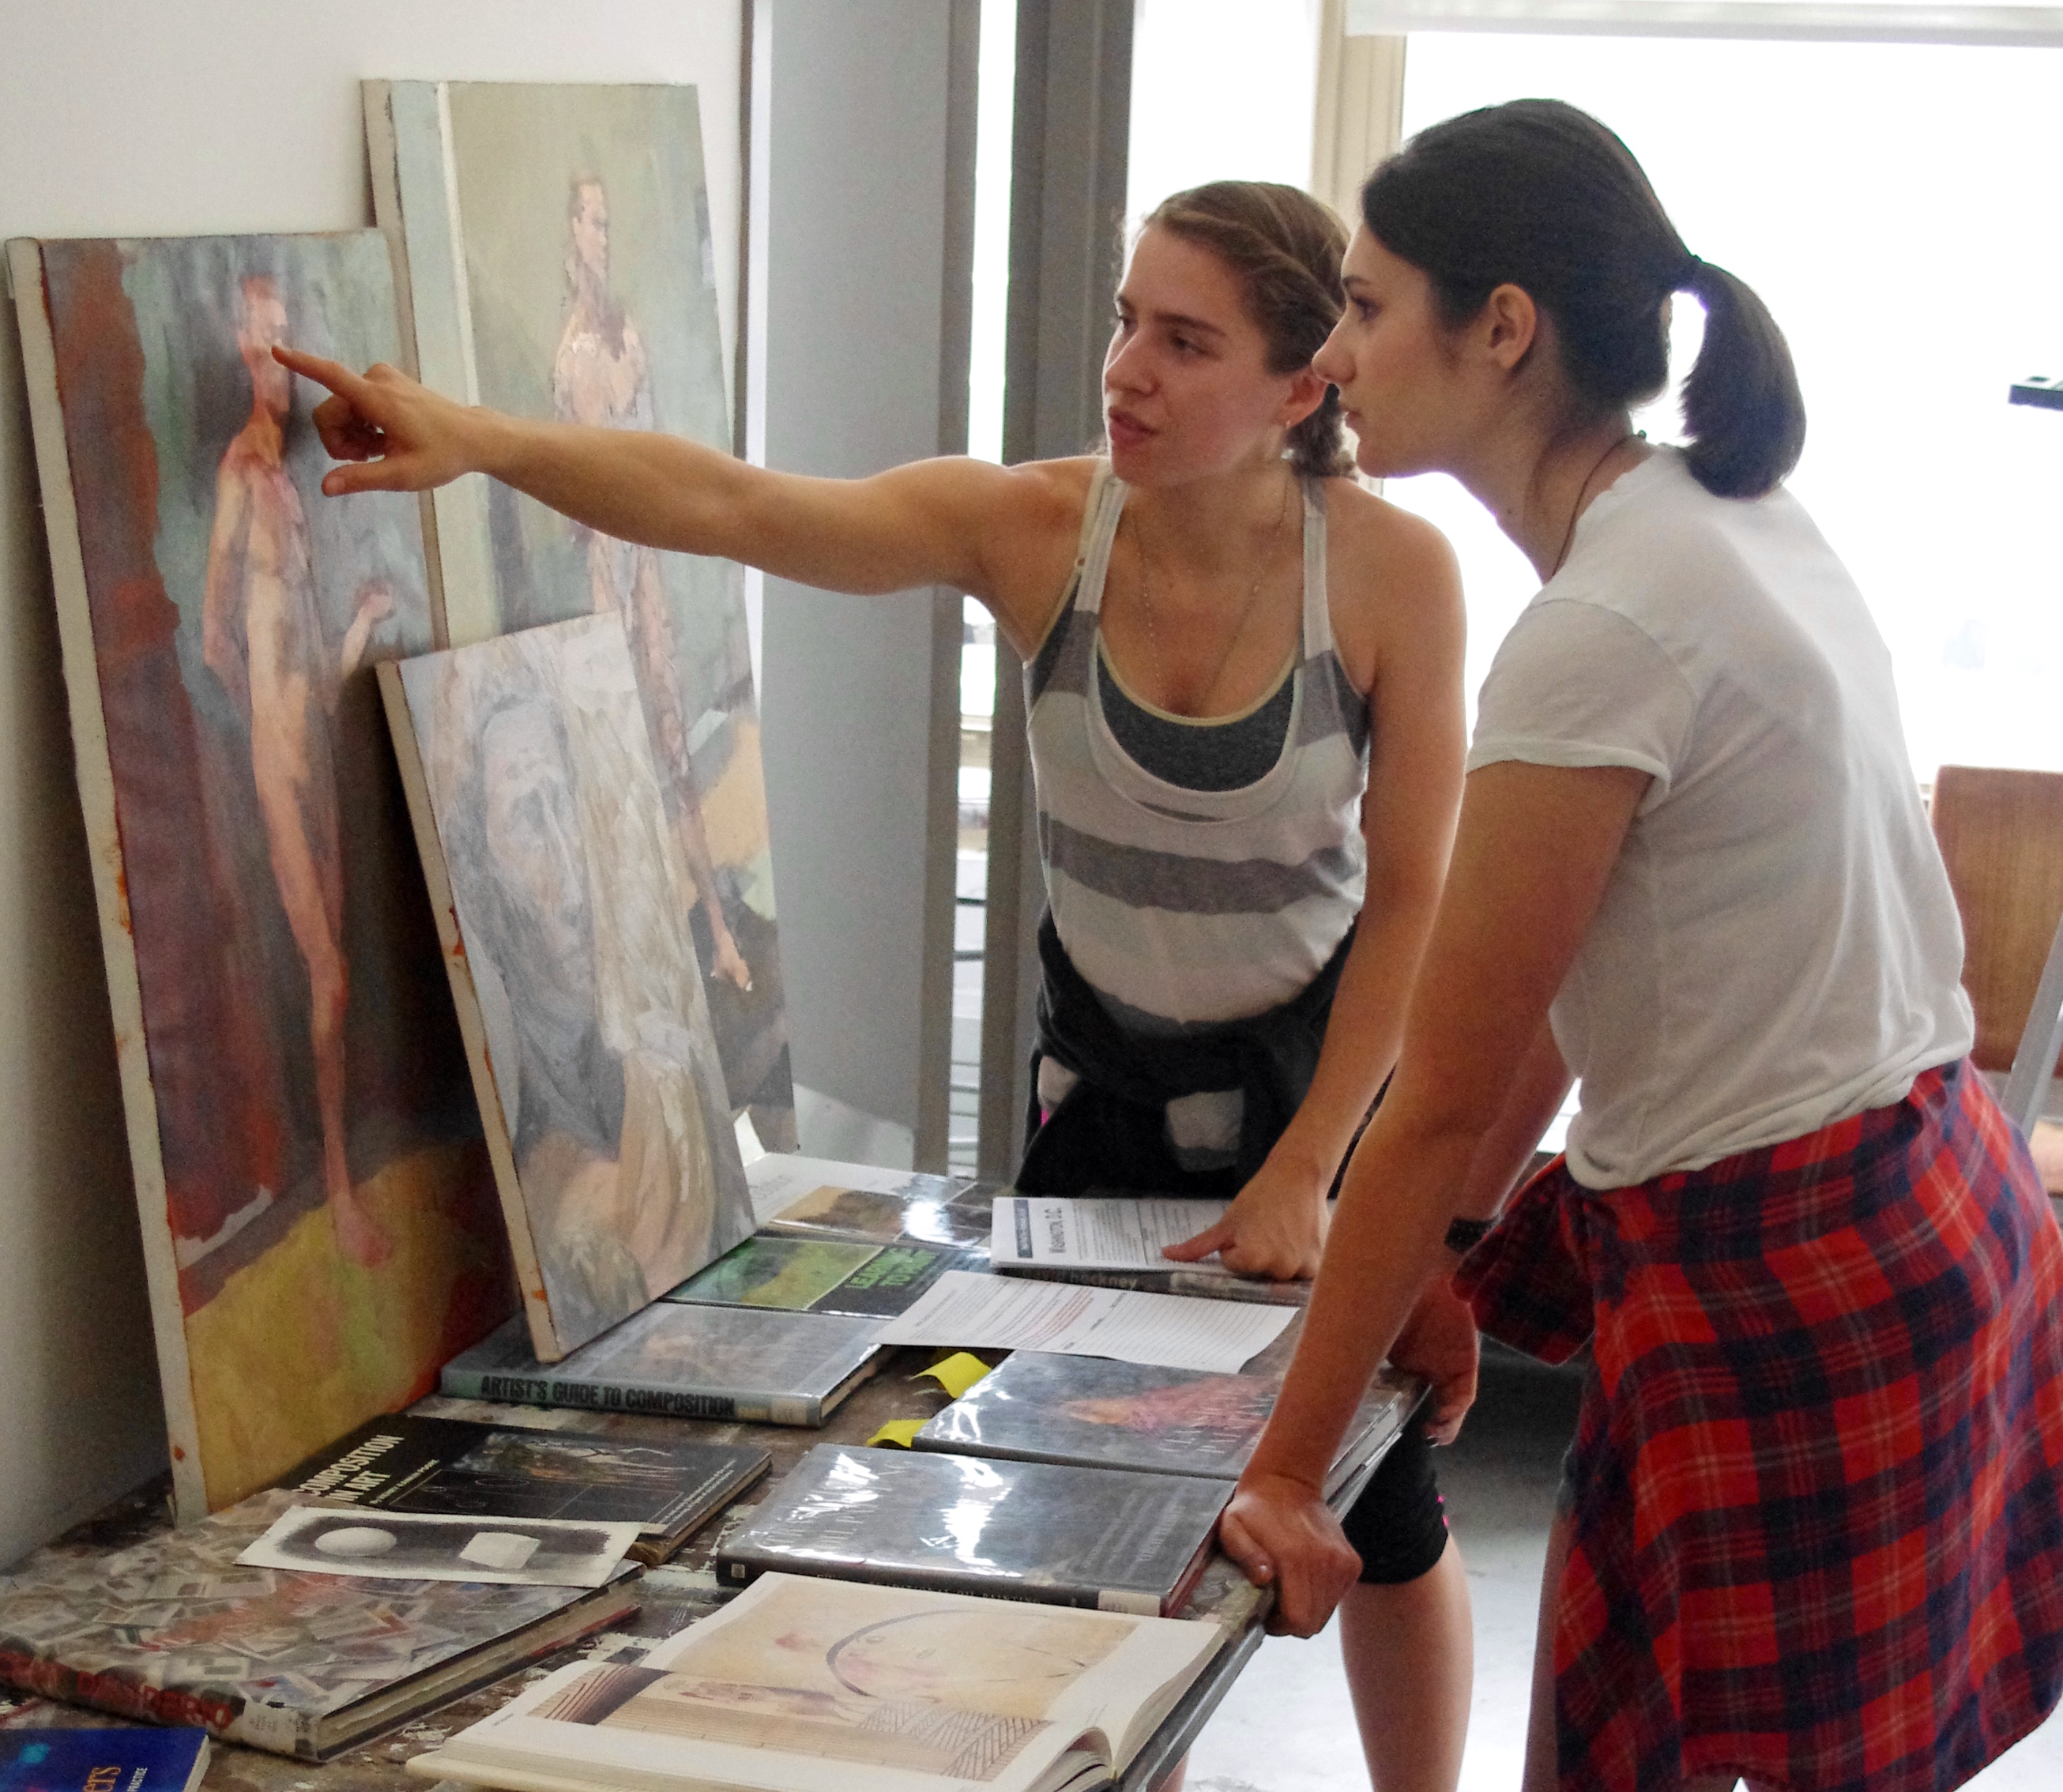 An instructor and a student look at a collection of artwork on a table. Three paintings lean against the wall, and the instructor points to one of the paintings.